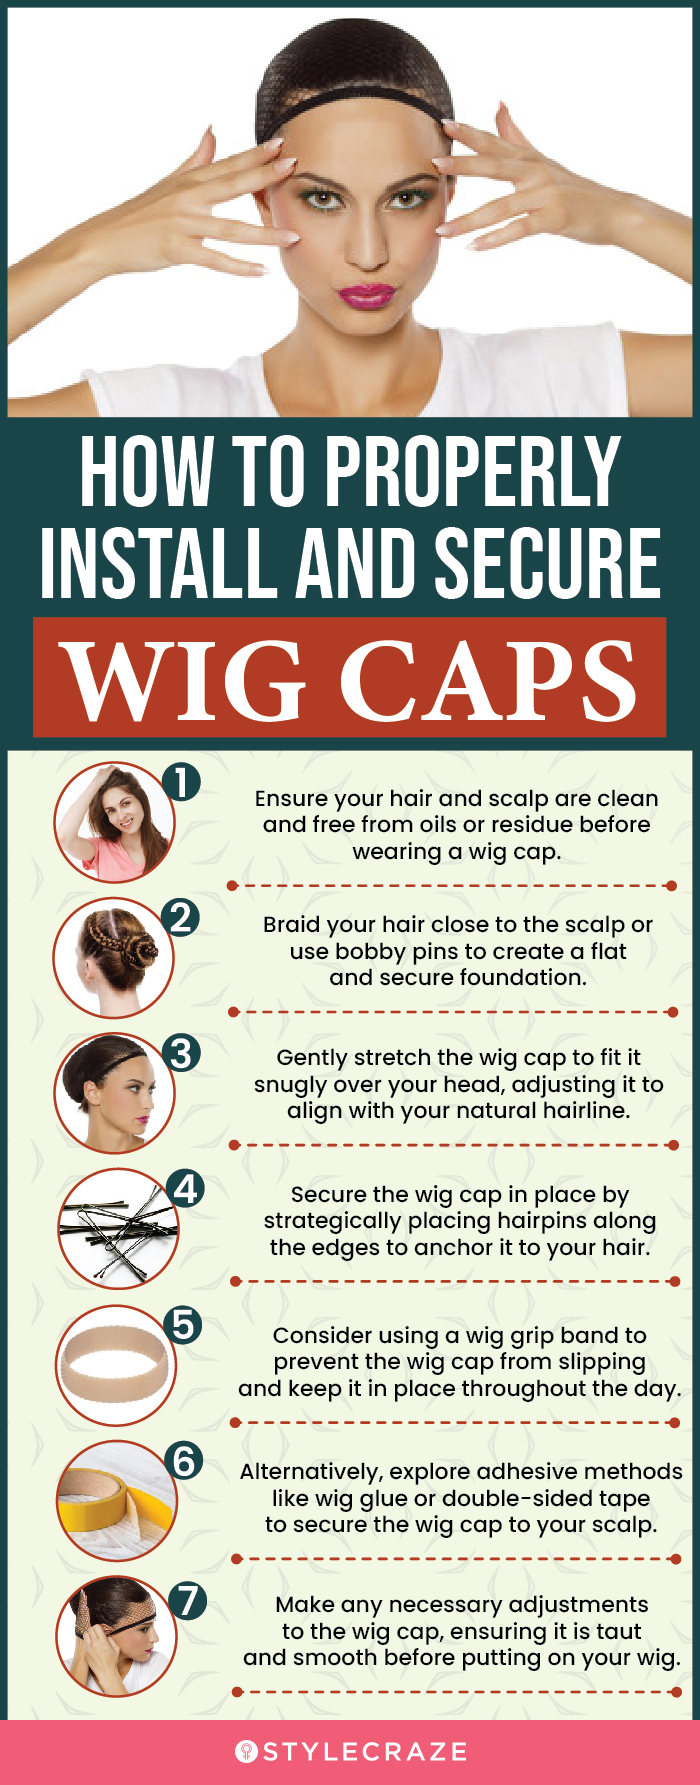 How To Properly Install And Secure Wig Caps (infographic)